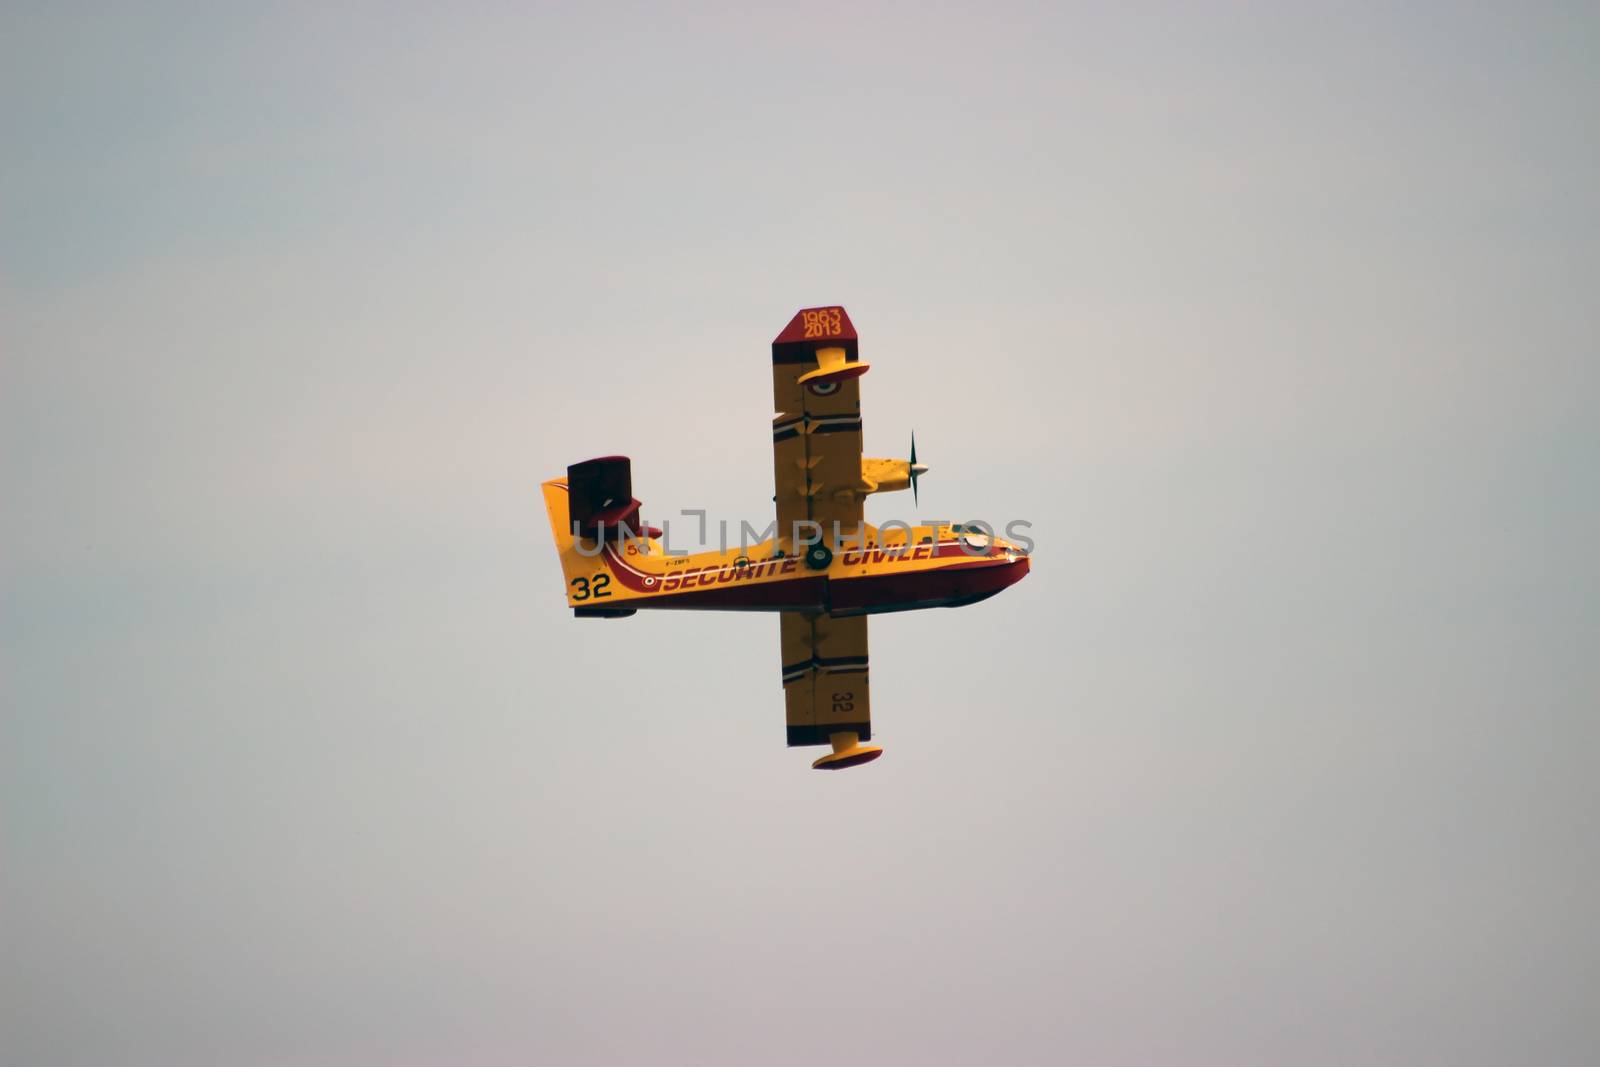 Canadair Fire Fighting Airplane in Action by bensib